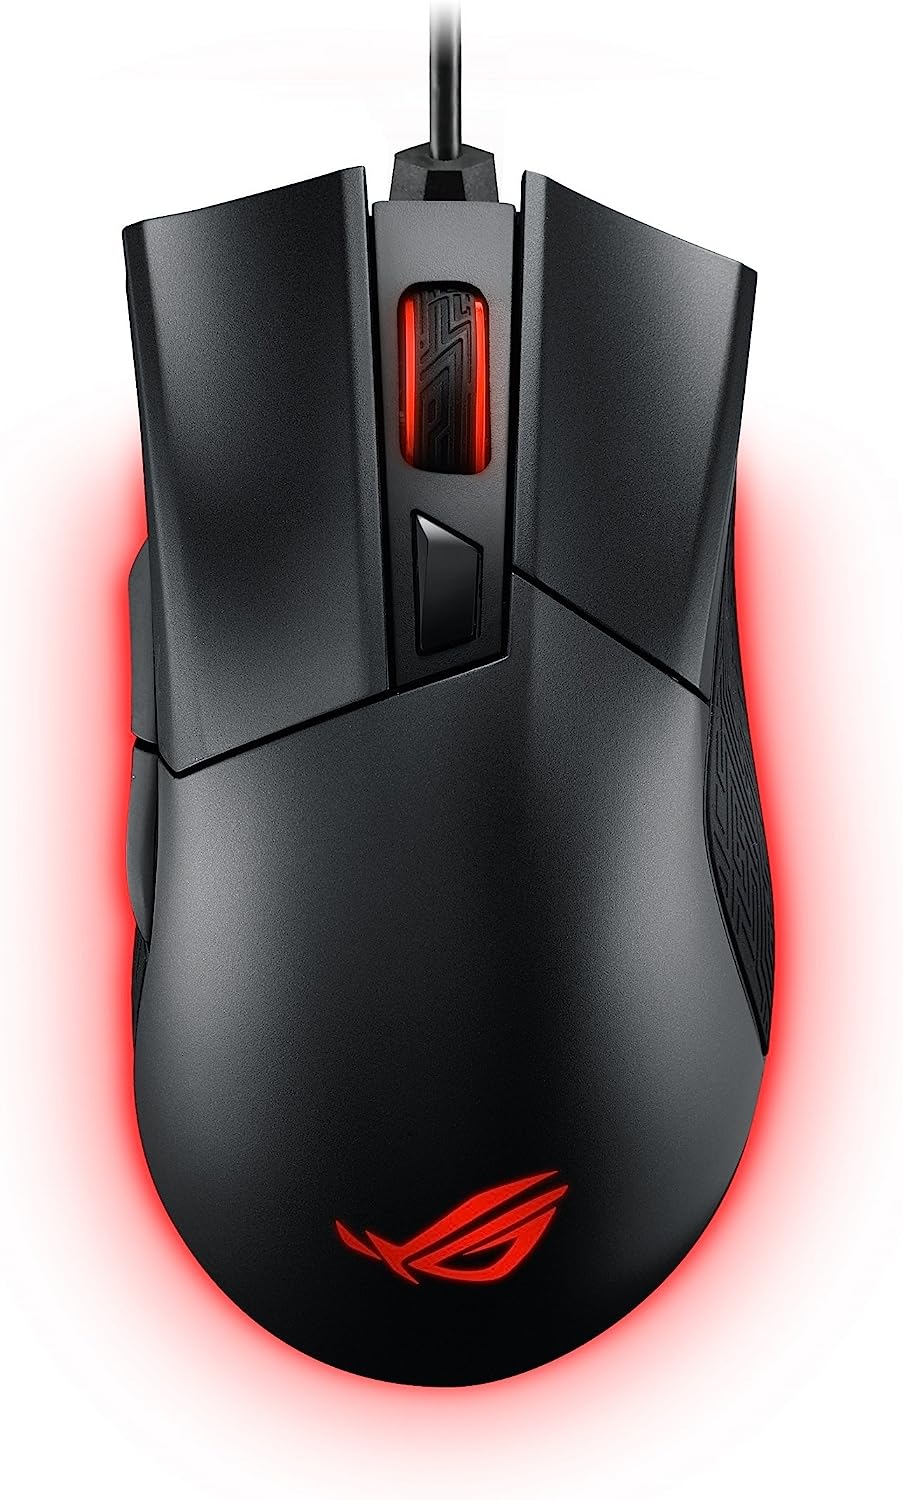 Asus ROG Gladius II Aura Sync USB Wired Optical Ergonomic Gaming Mouse with DPI target button (12000 DPI)